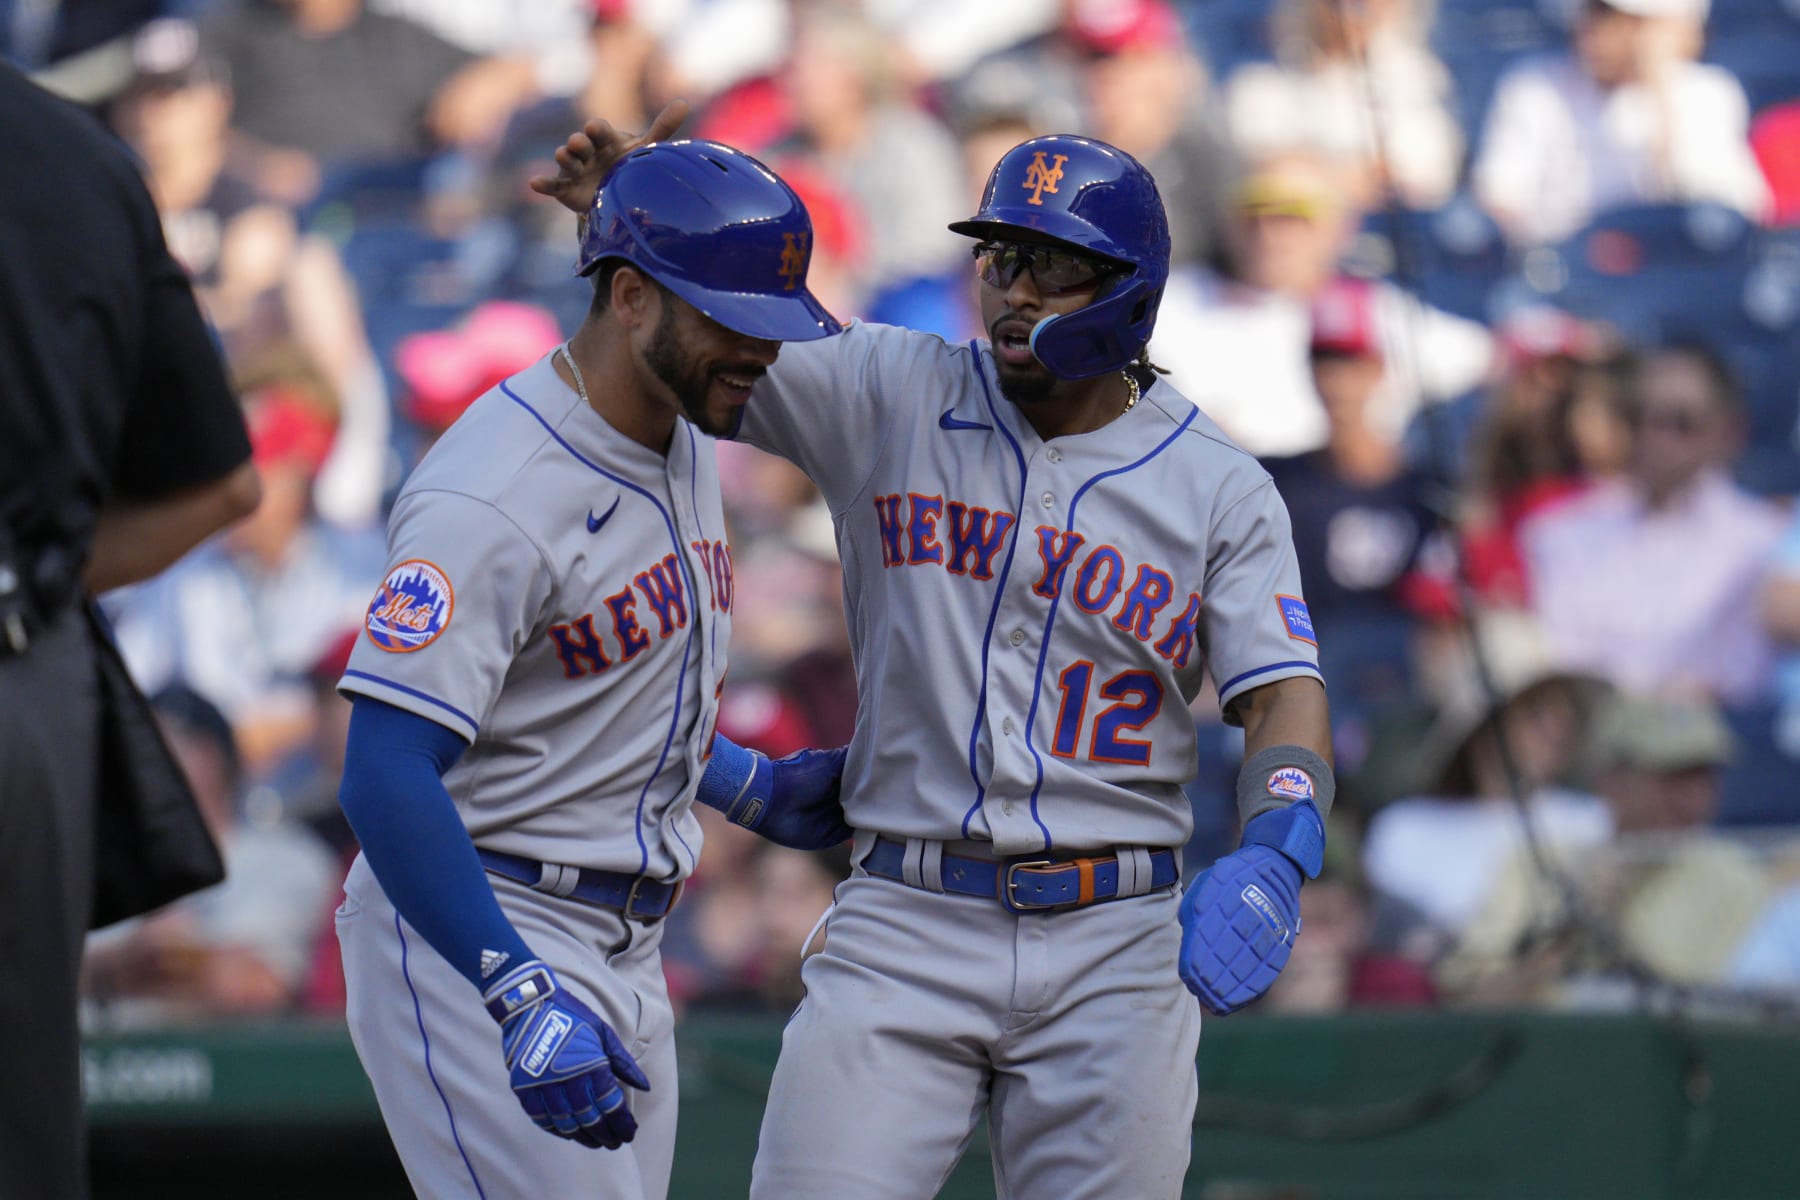 Tommy Pham on Mets hitters: 'Least-hardest working group